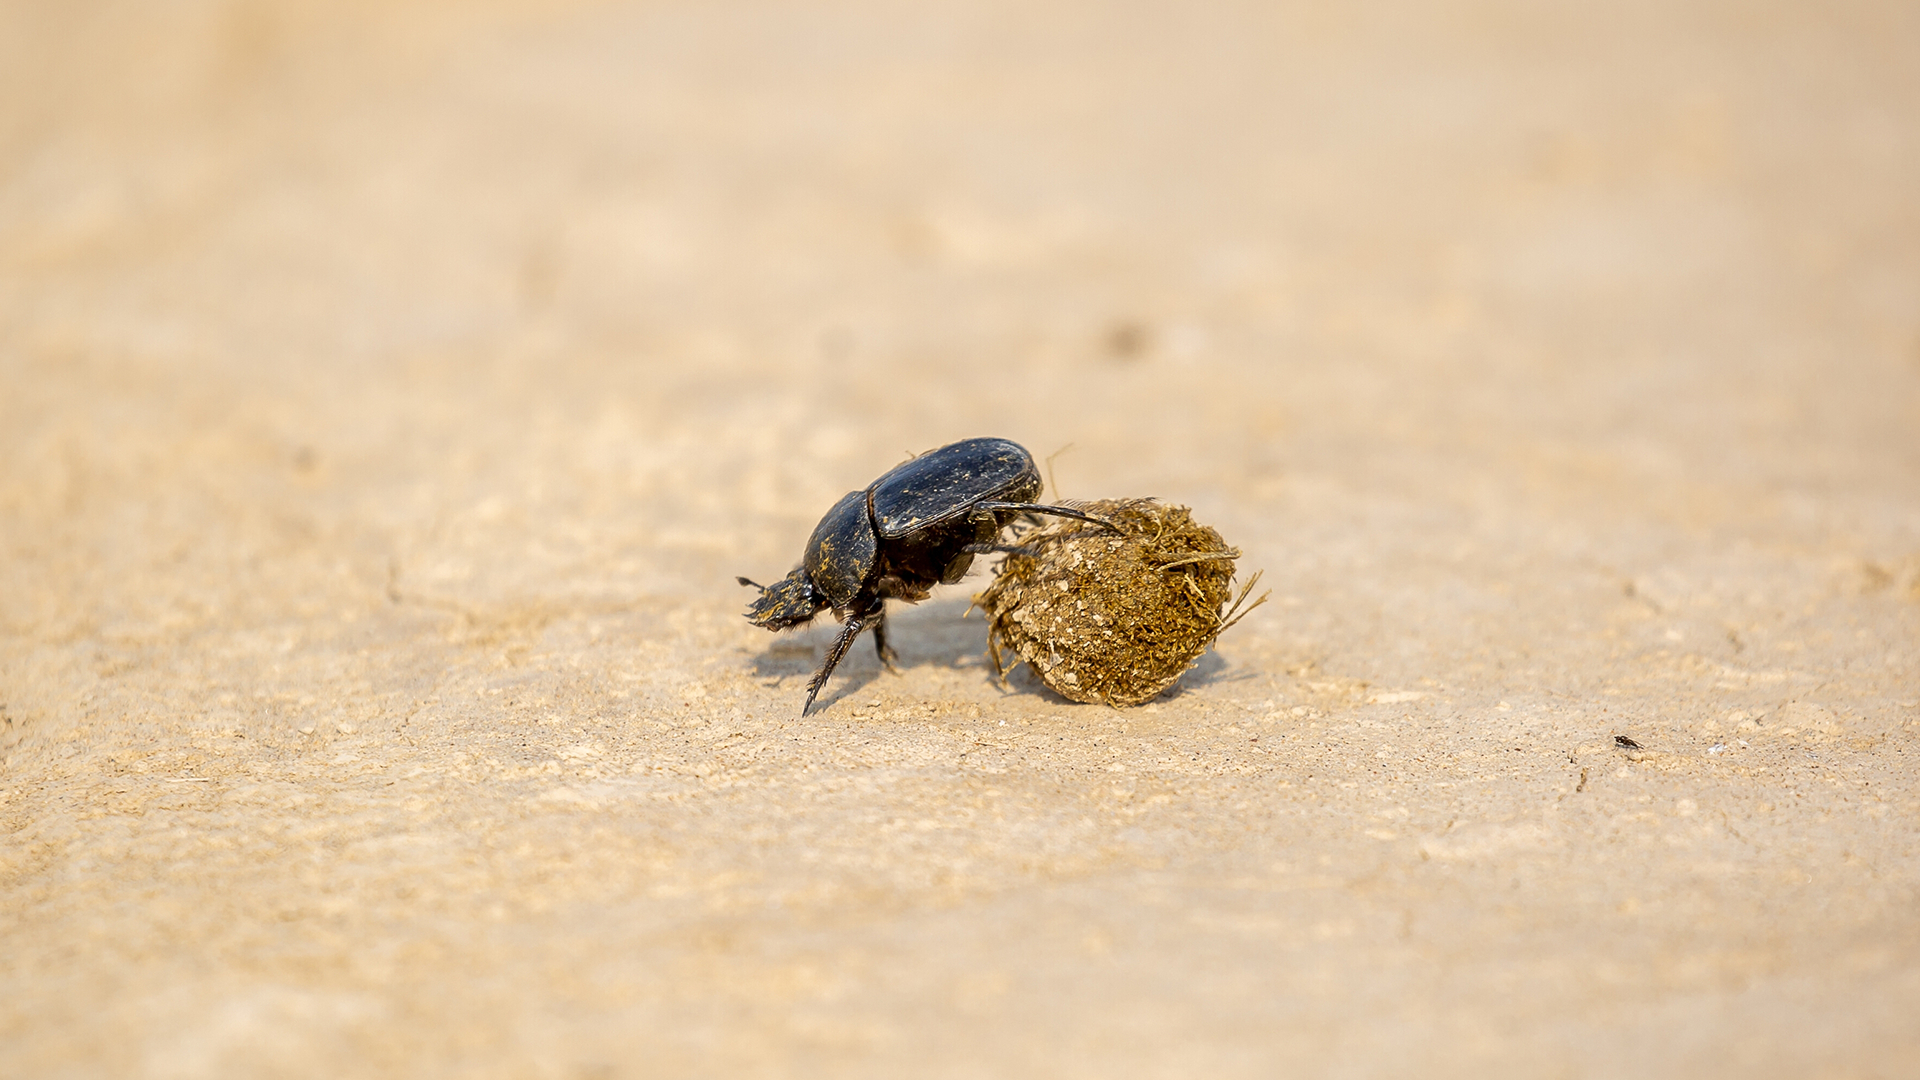 Bugs, a dung beetle